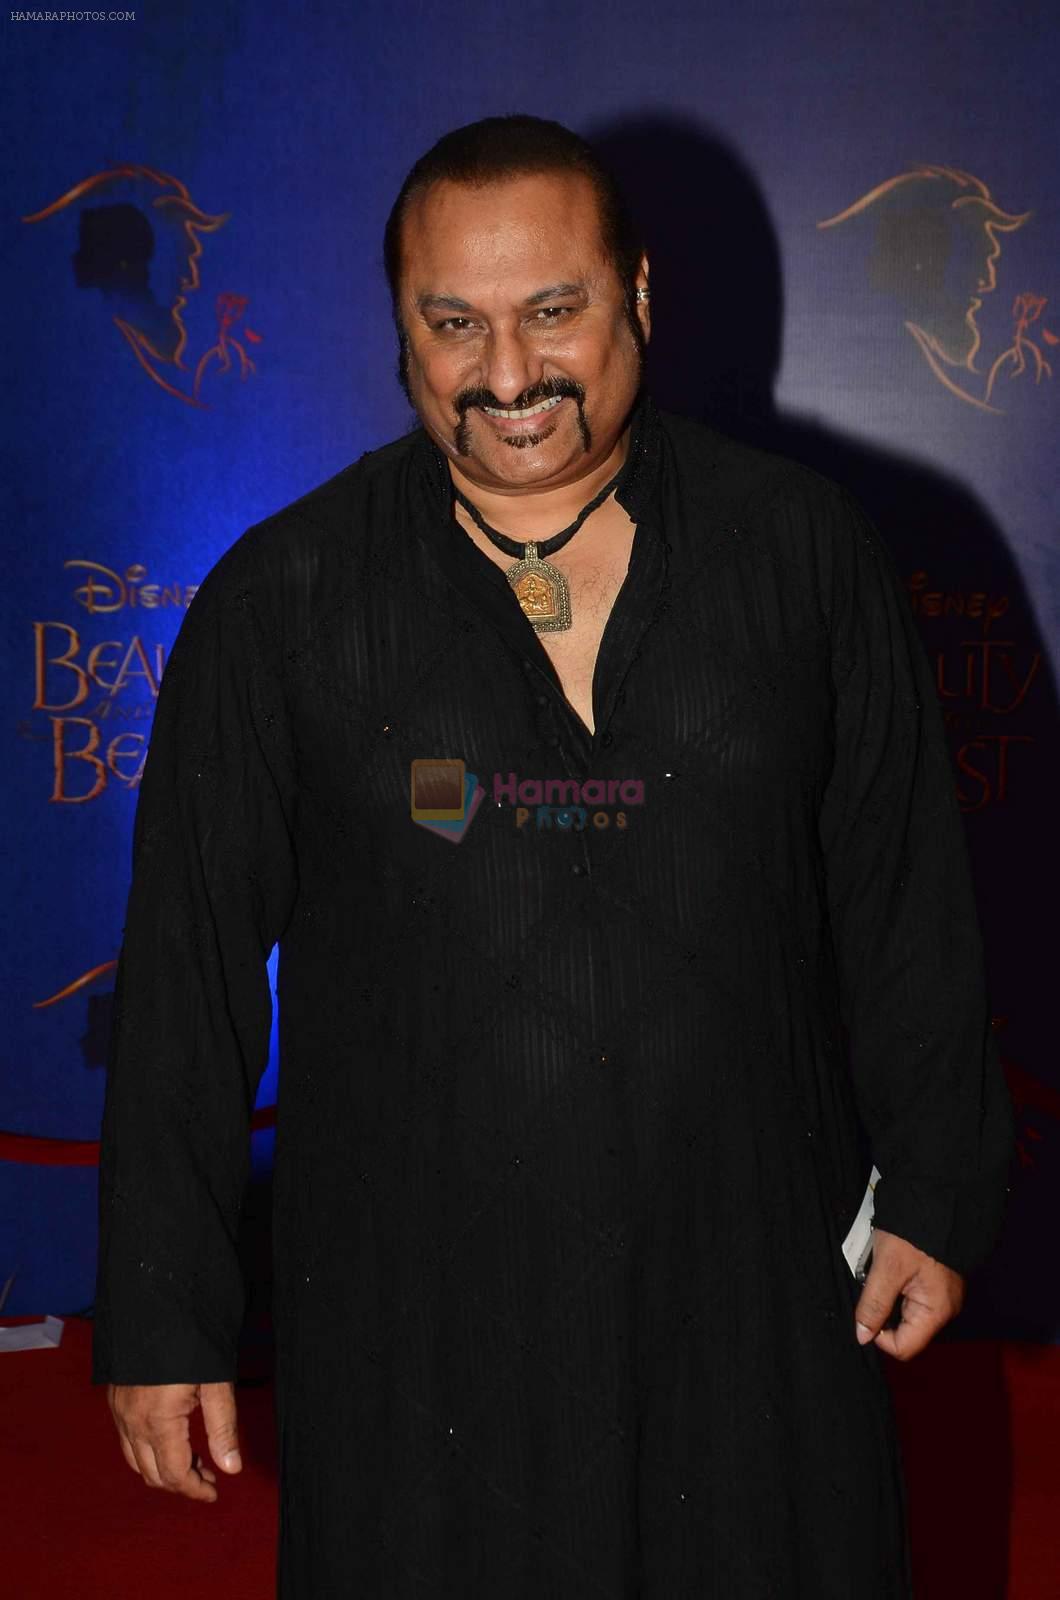 Leslie Lewis at Beauty and the Beast red carpet in Mumbai on 21st Oct 2015